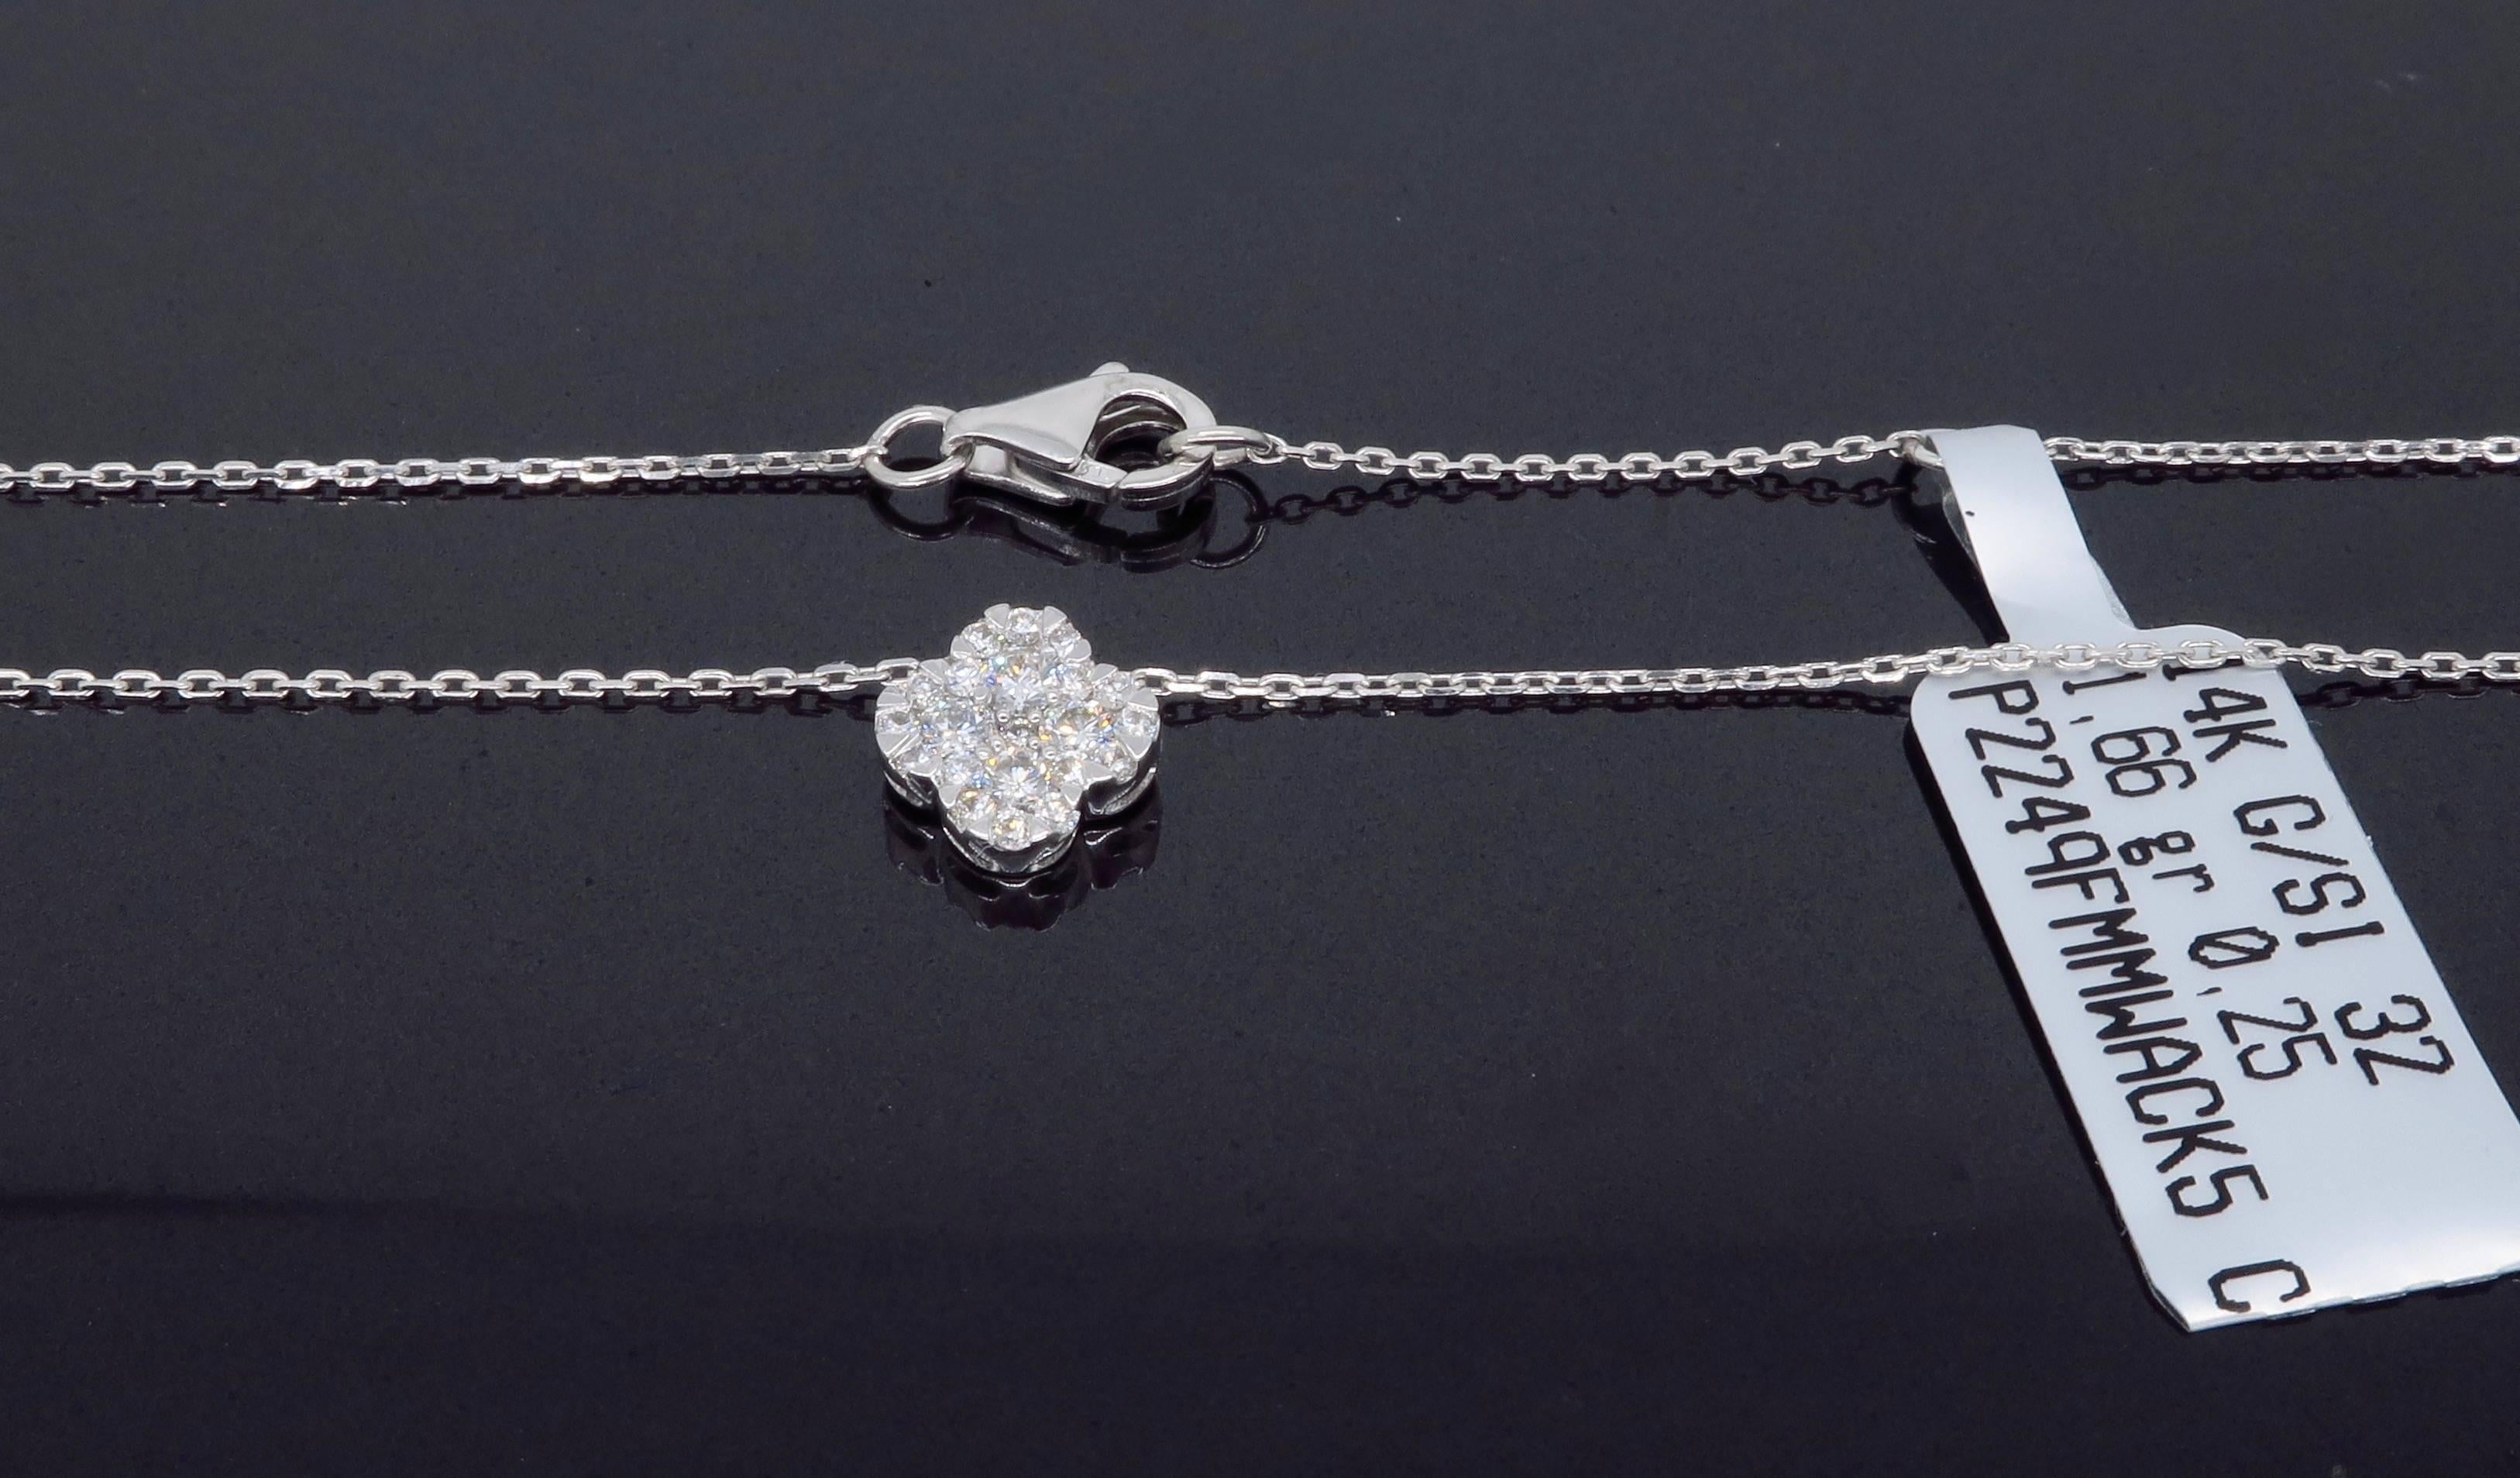 14K white gold necklace features .25CTW of Round Brilliant Cut Diamonds set into two rows to form a clover design. The diamonds have G color and SI clarity. Measuring 16.5” in length the necklace weighs 1.66 grams.